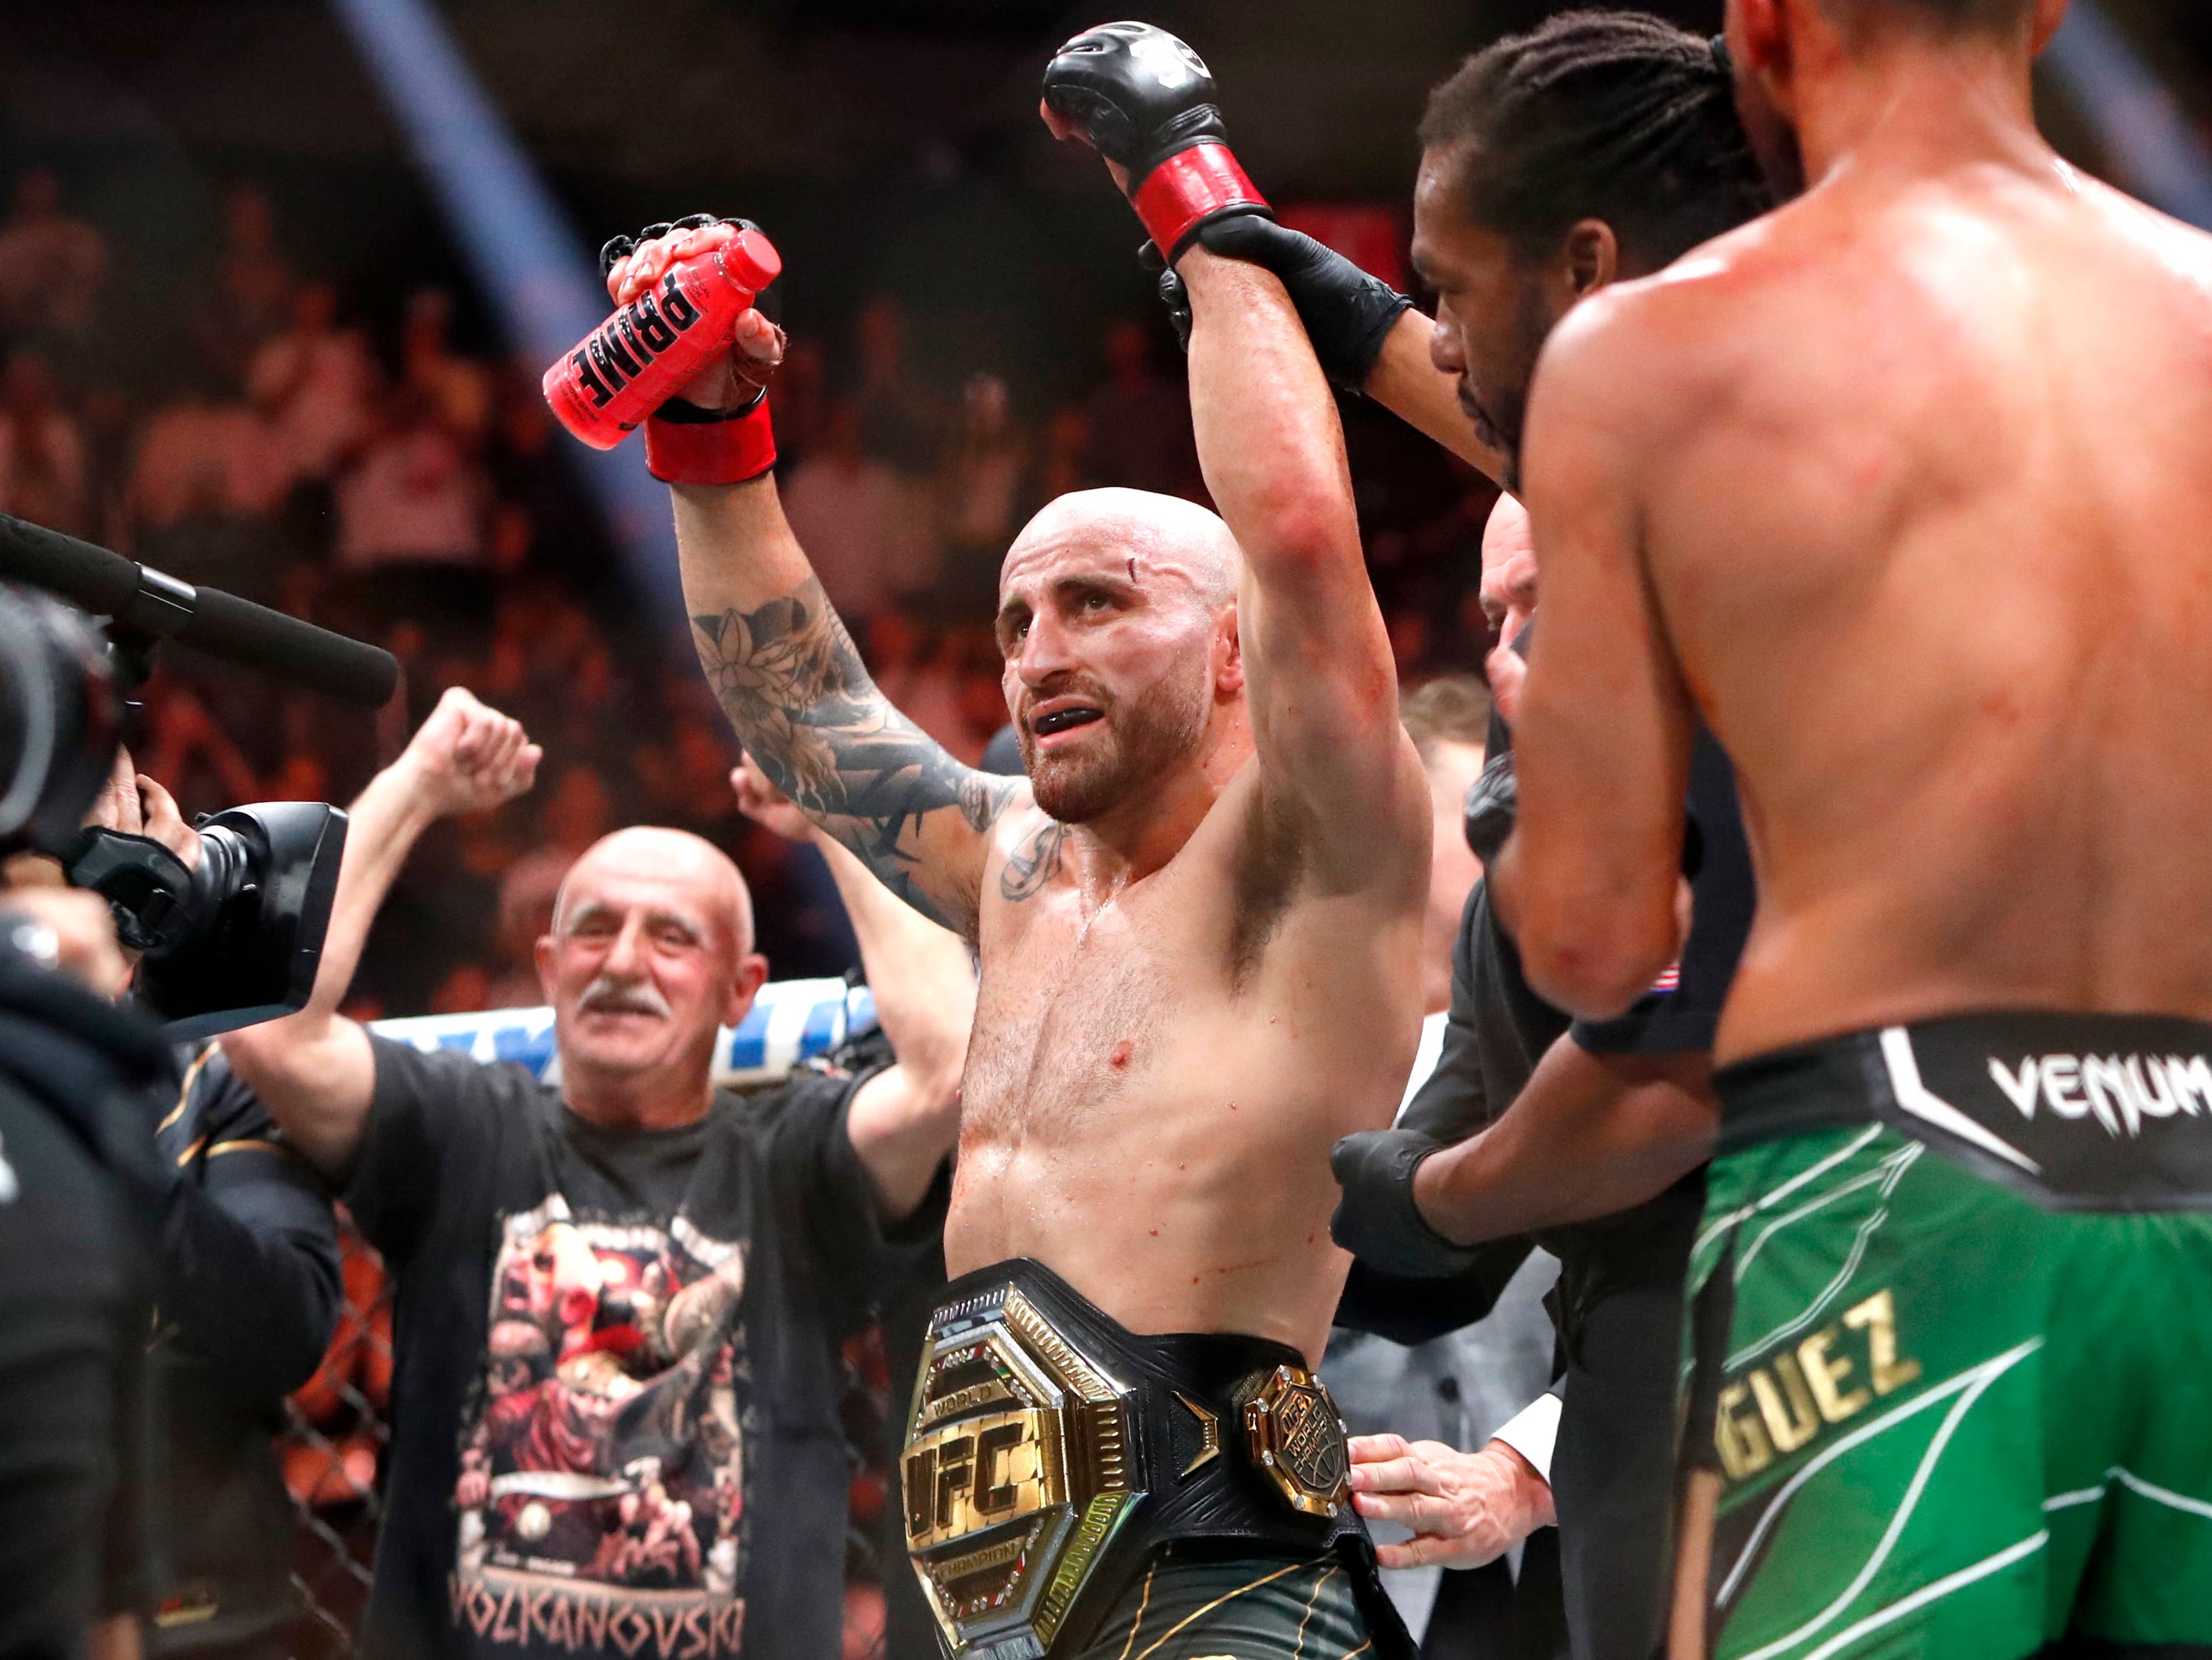 Volkanovski unified the UFC featherweight titles by beating Yair Rodriguez